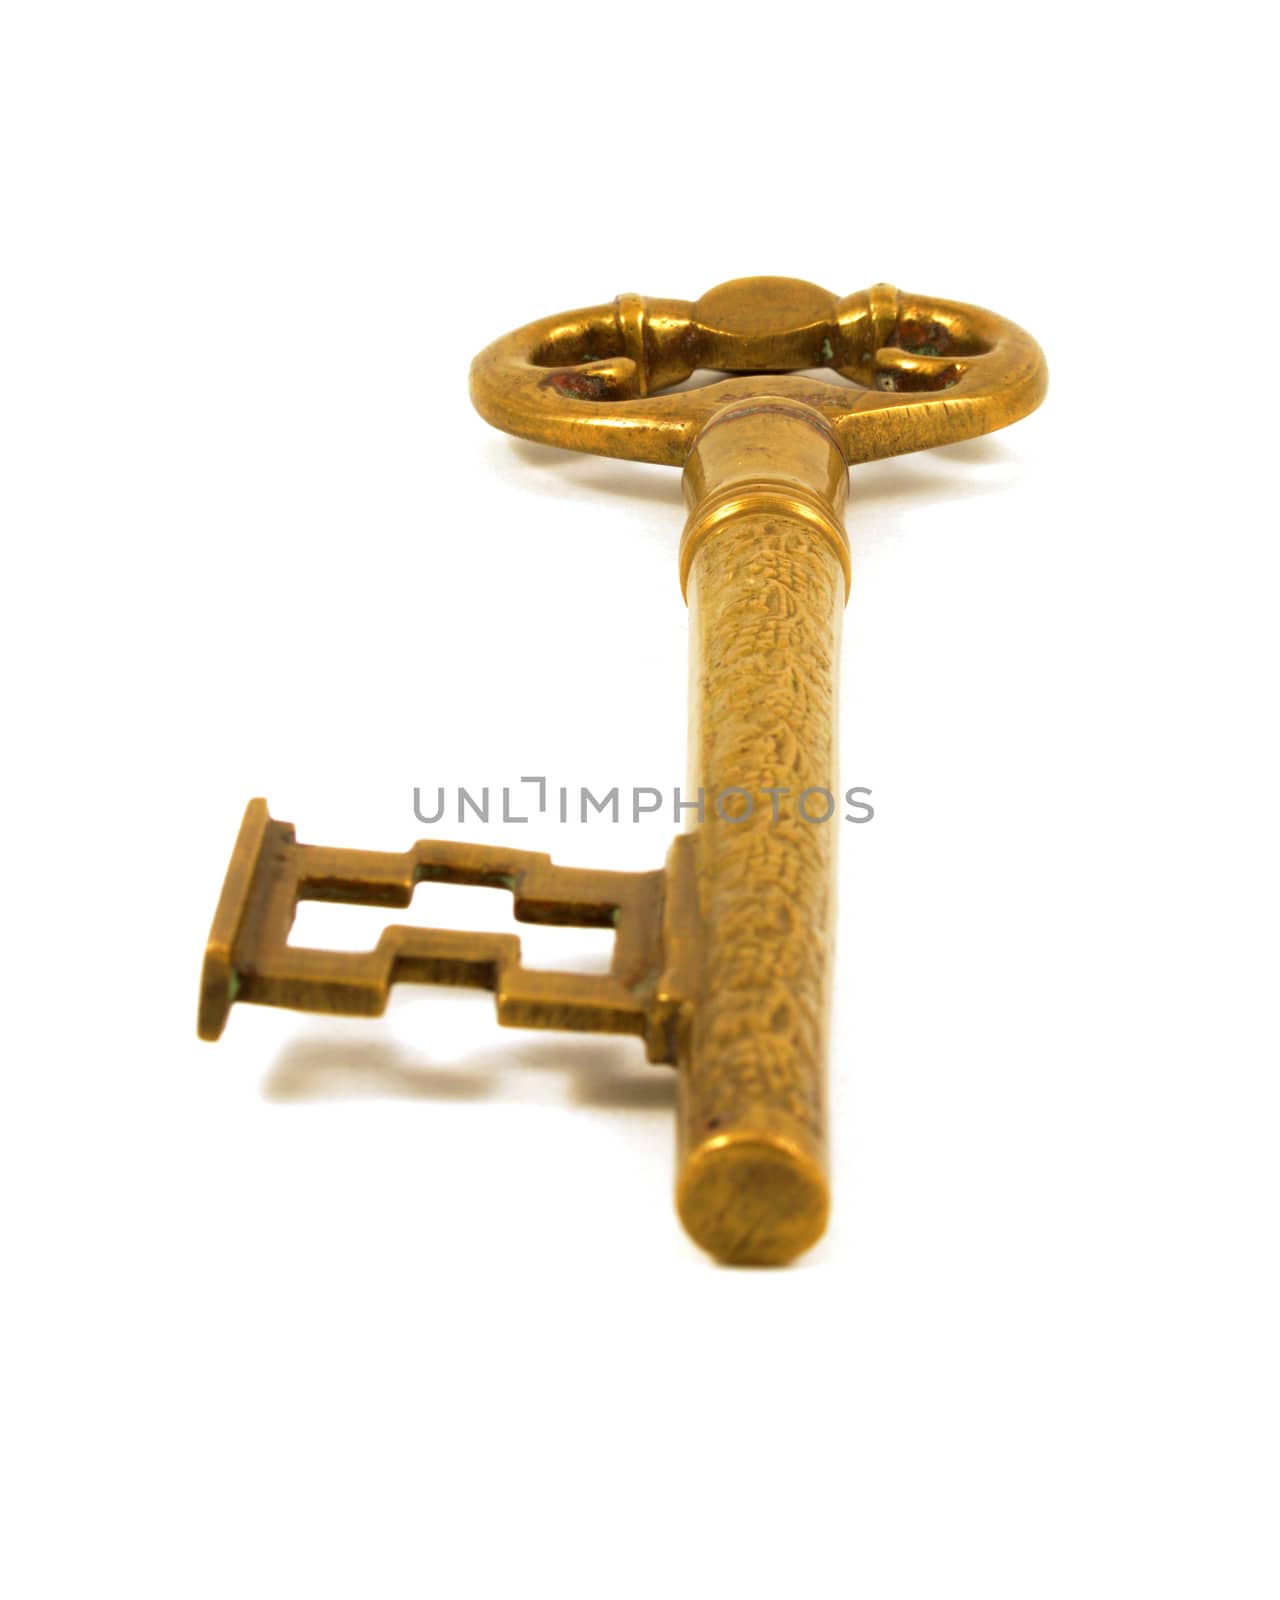 An isolated over white image of a large brass key.